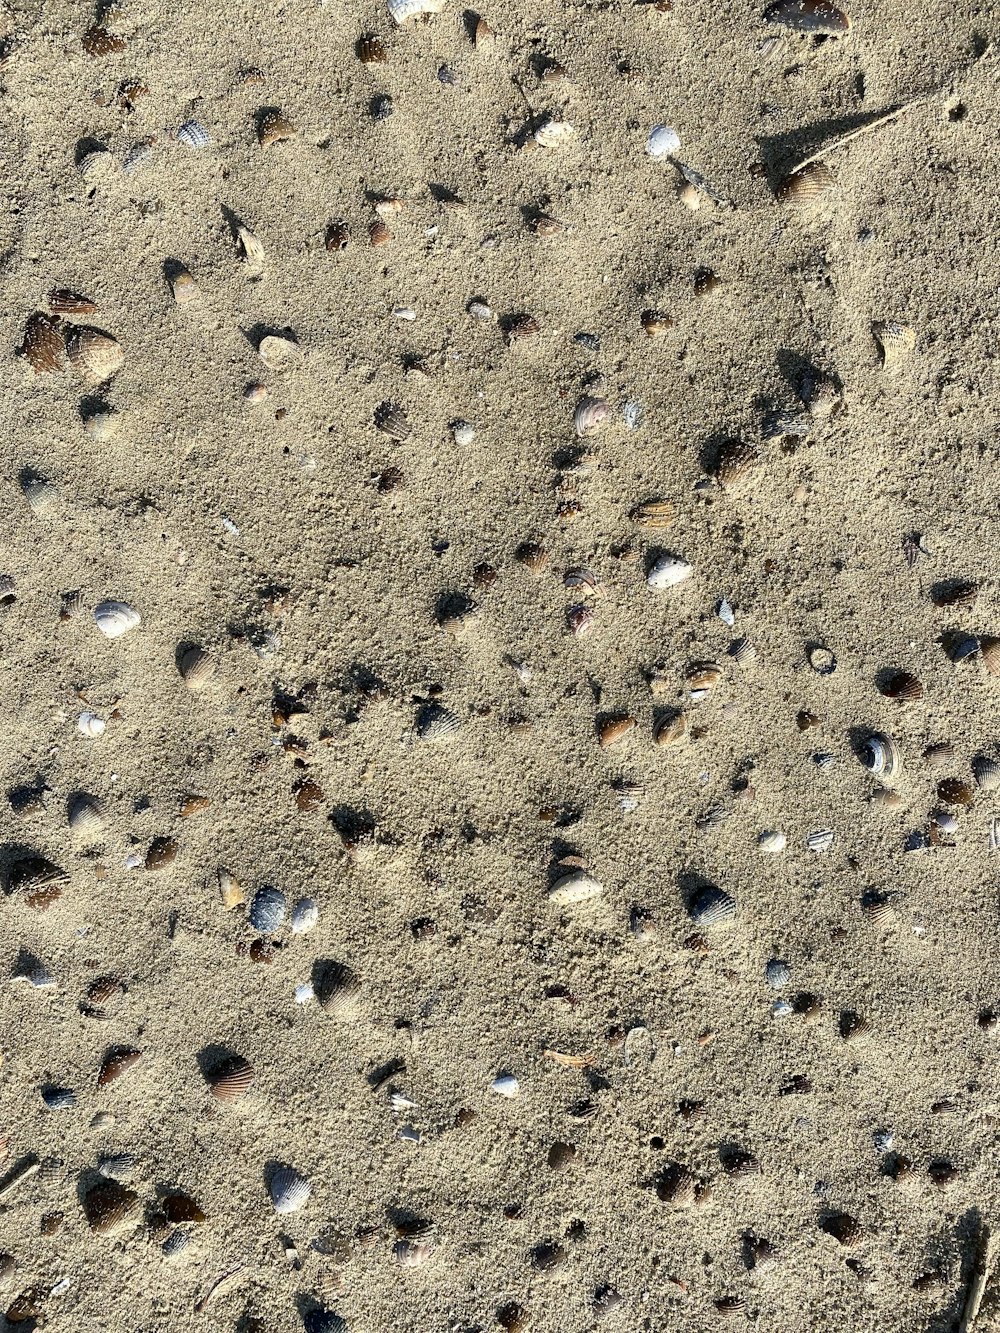 a close up of sand and shells on a beach